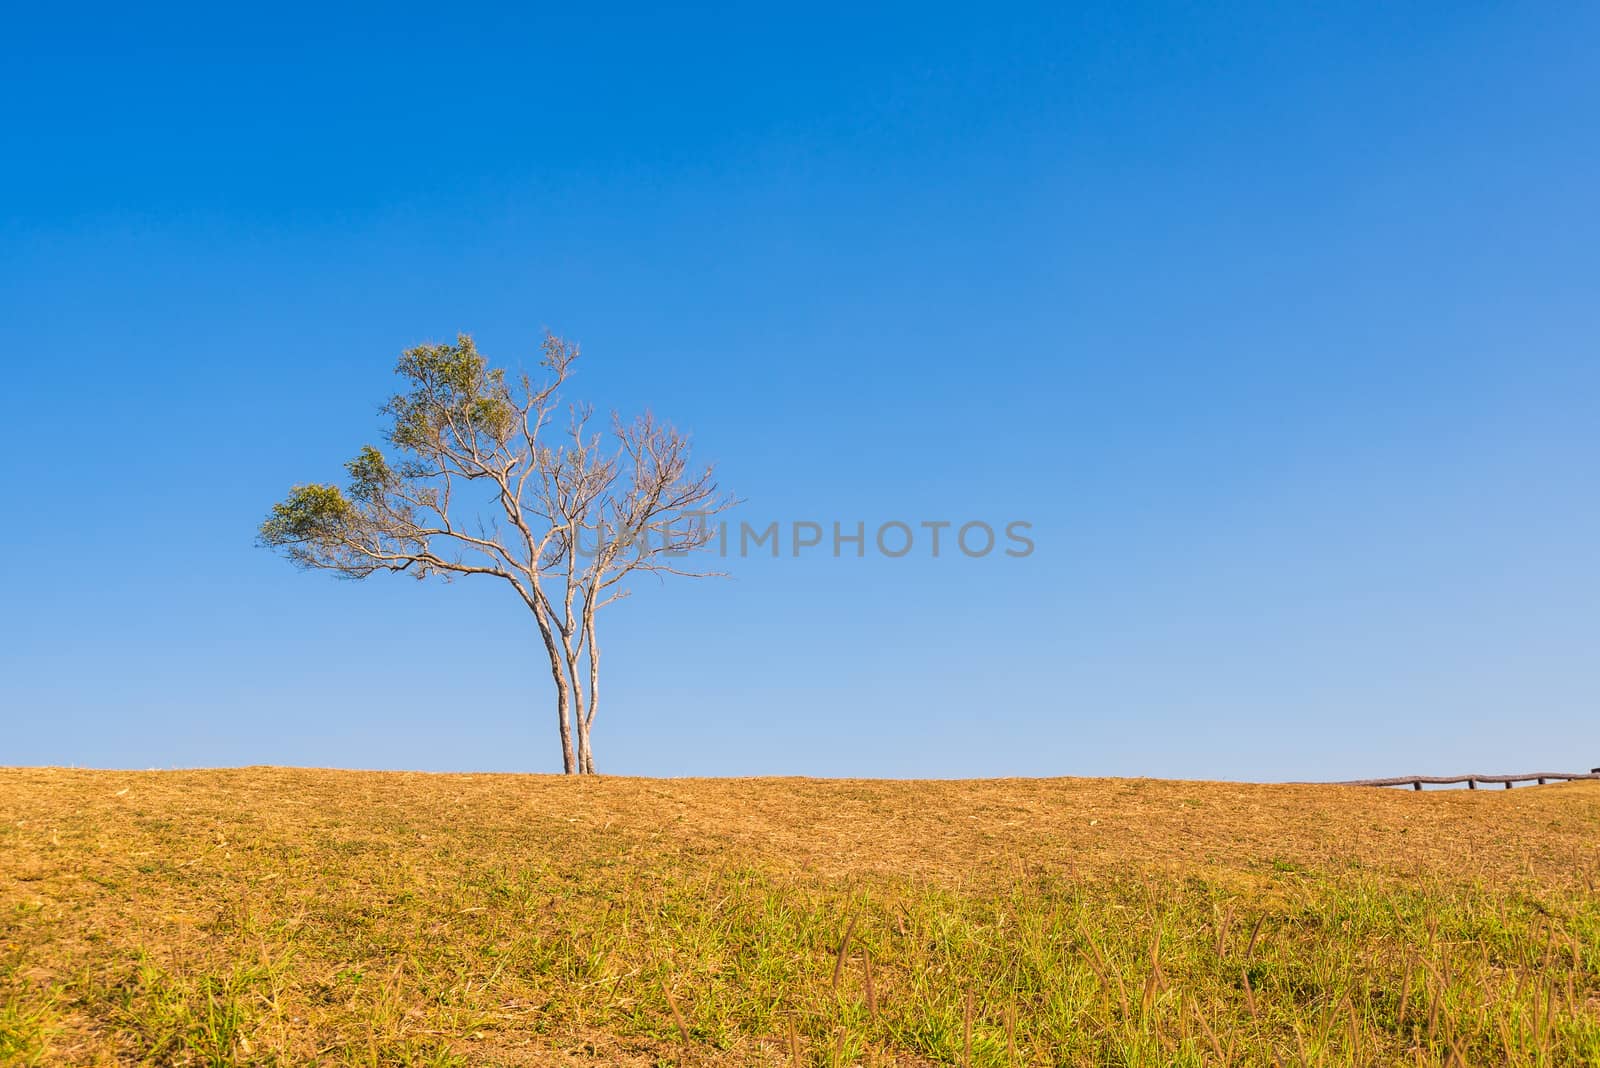 tree on hill with blue sky by moggara12